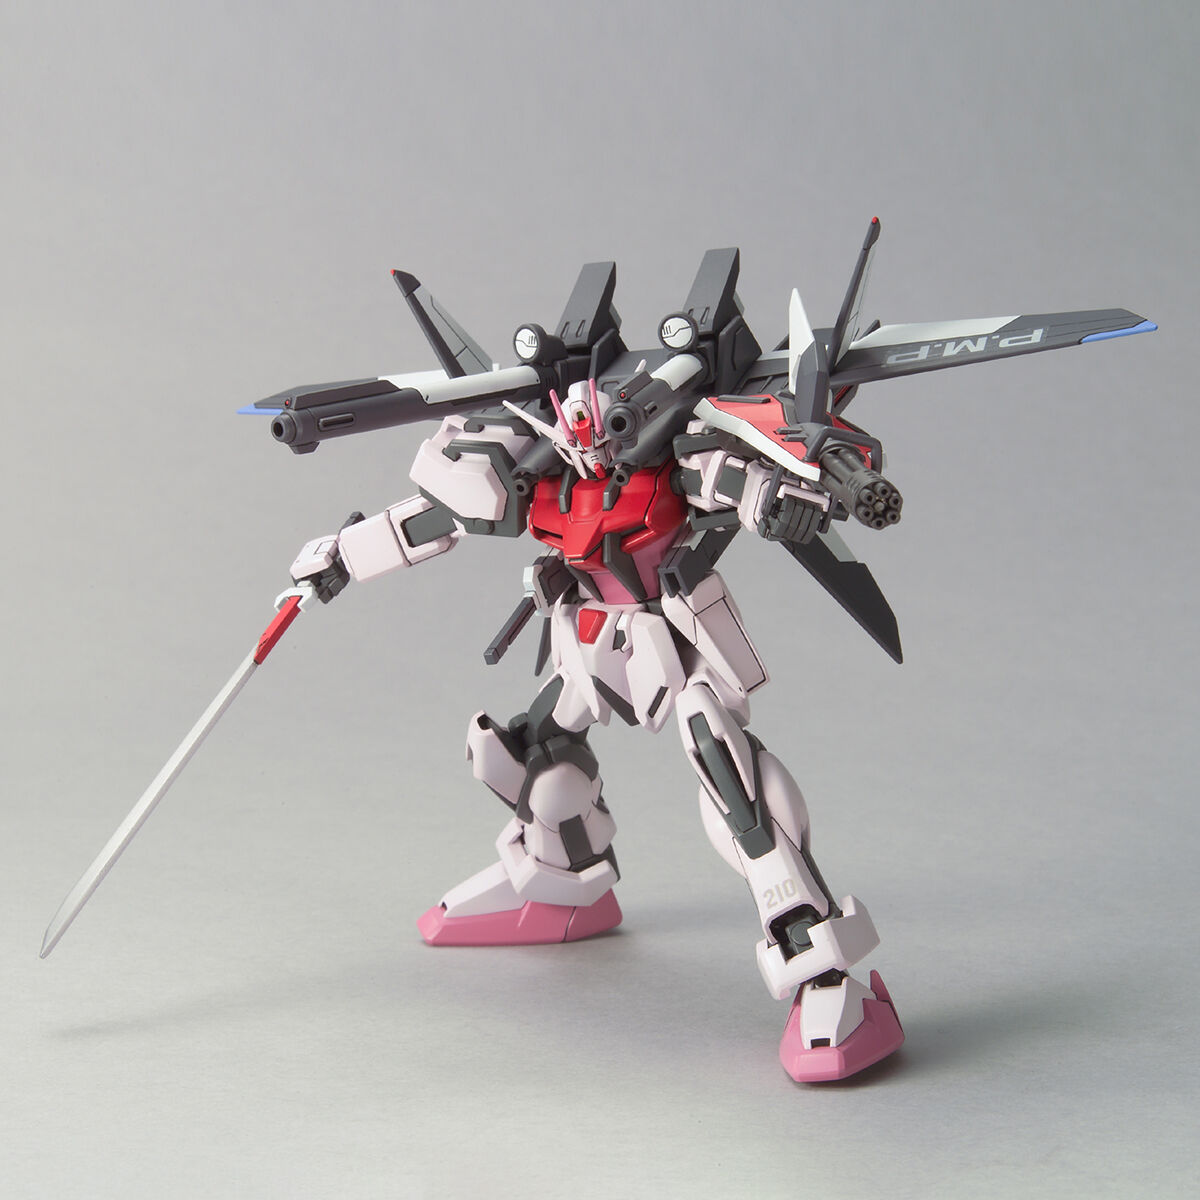 HGGS 1/144 MSV-01 MBF-02 + P202QX Strike Rouge Gundam Integrated Weapons Striker Pack